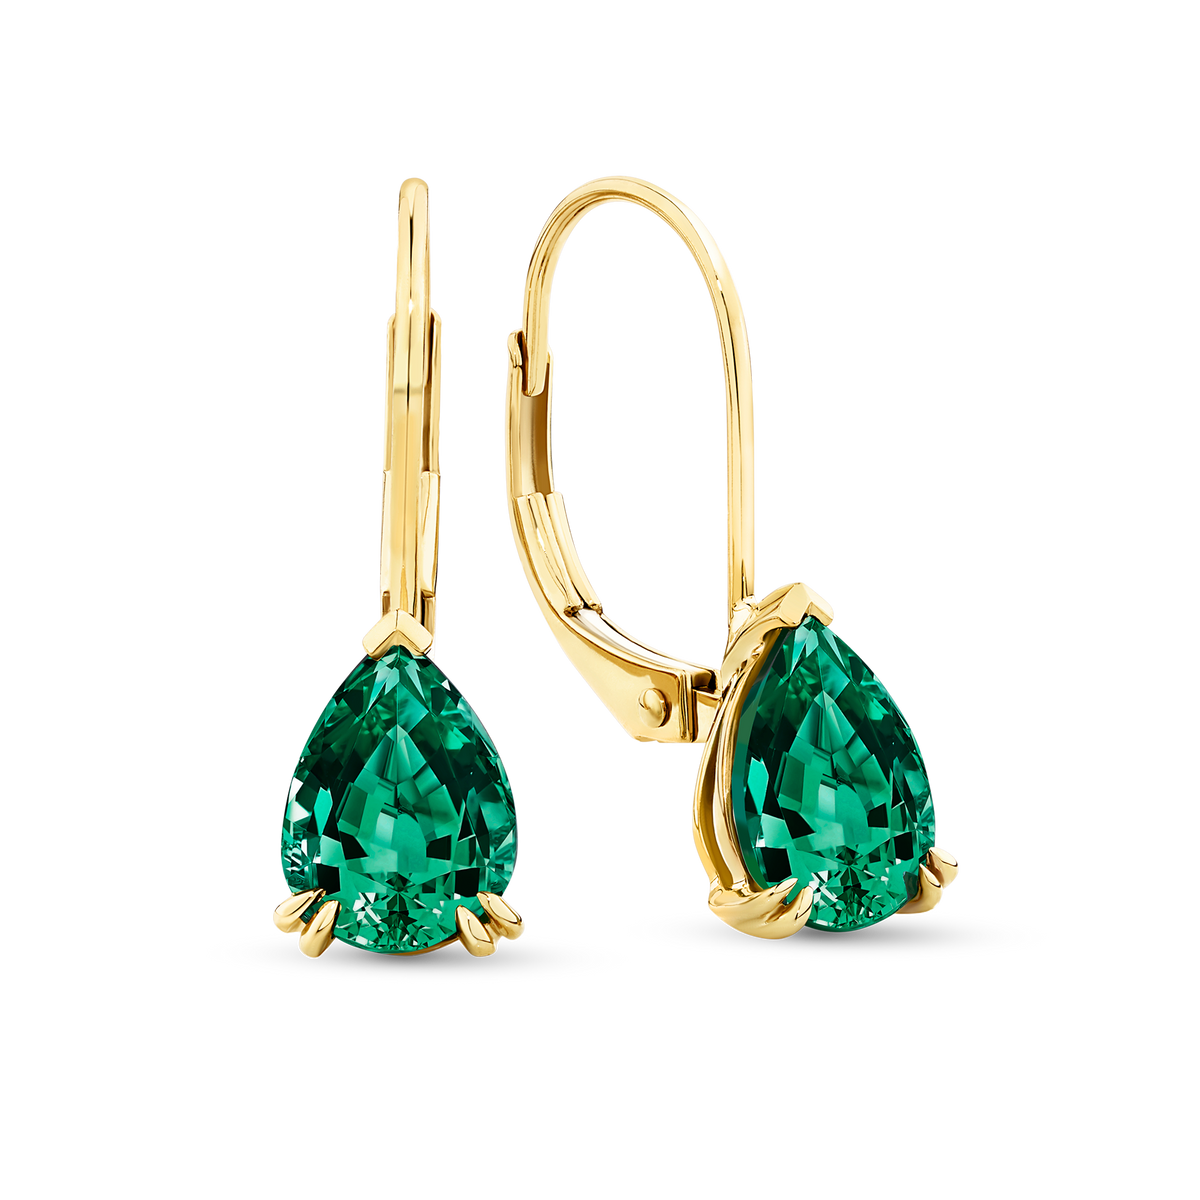 2.10ct TW Created Emerald Pear Earrings in 9ct Yellow Gold